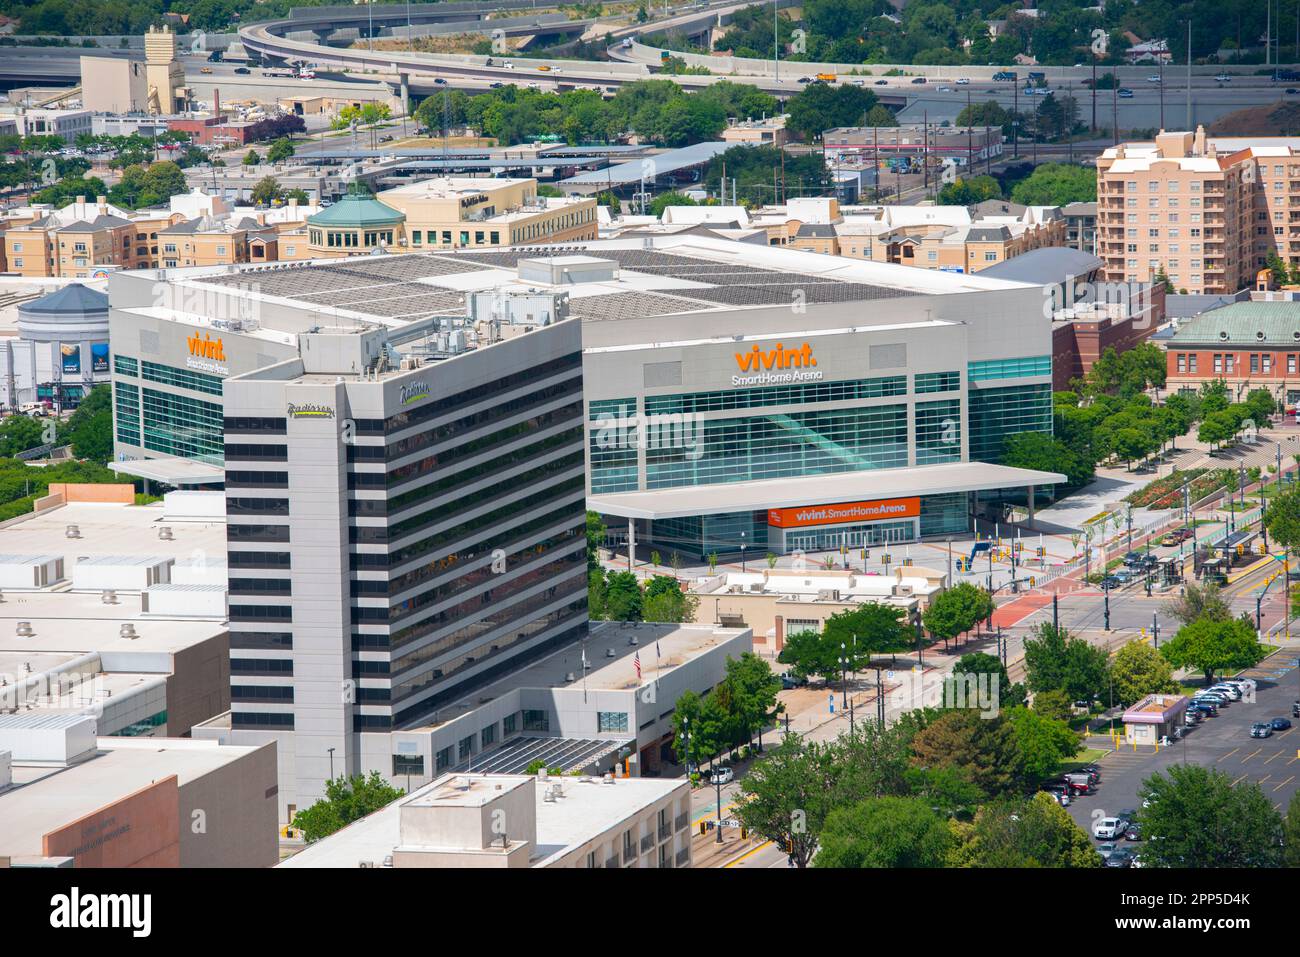 Vivint Smart Home Arena aerial view in Salt Lake City, Utah UT, USA. It is the home of Utah Jazz and and the figure skating arena for 2002 Olympics. Stock Photo